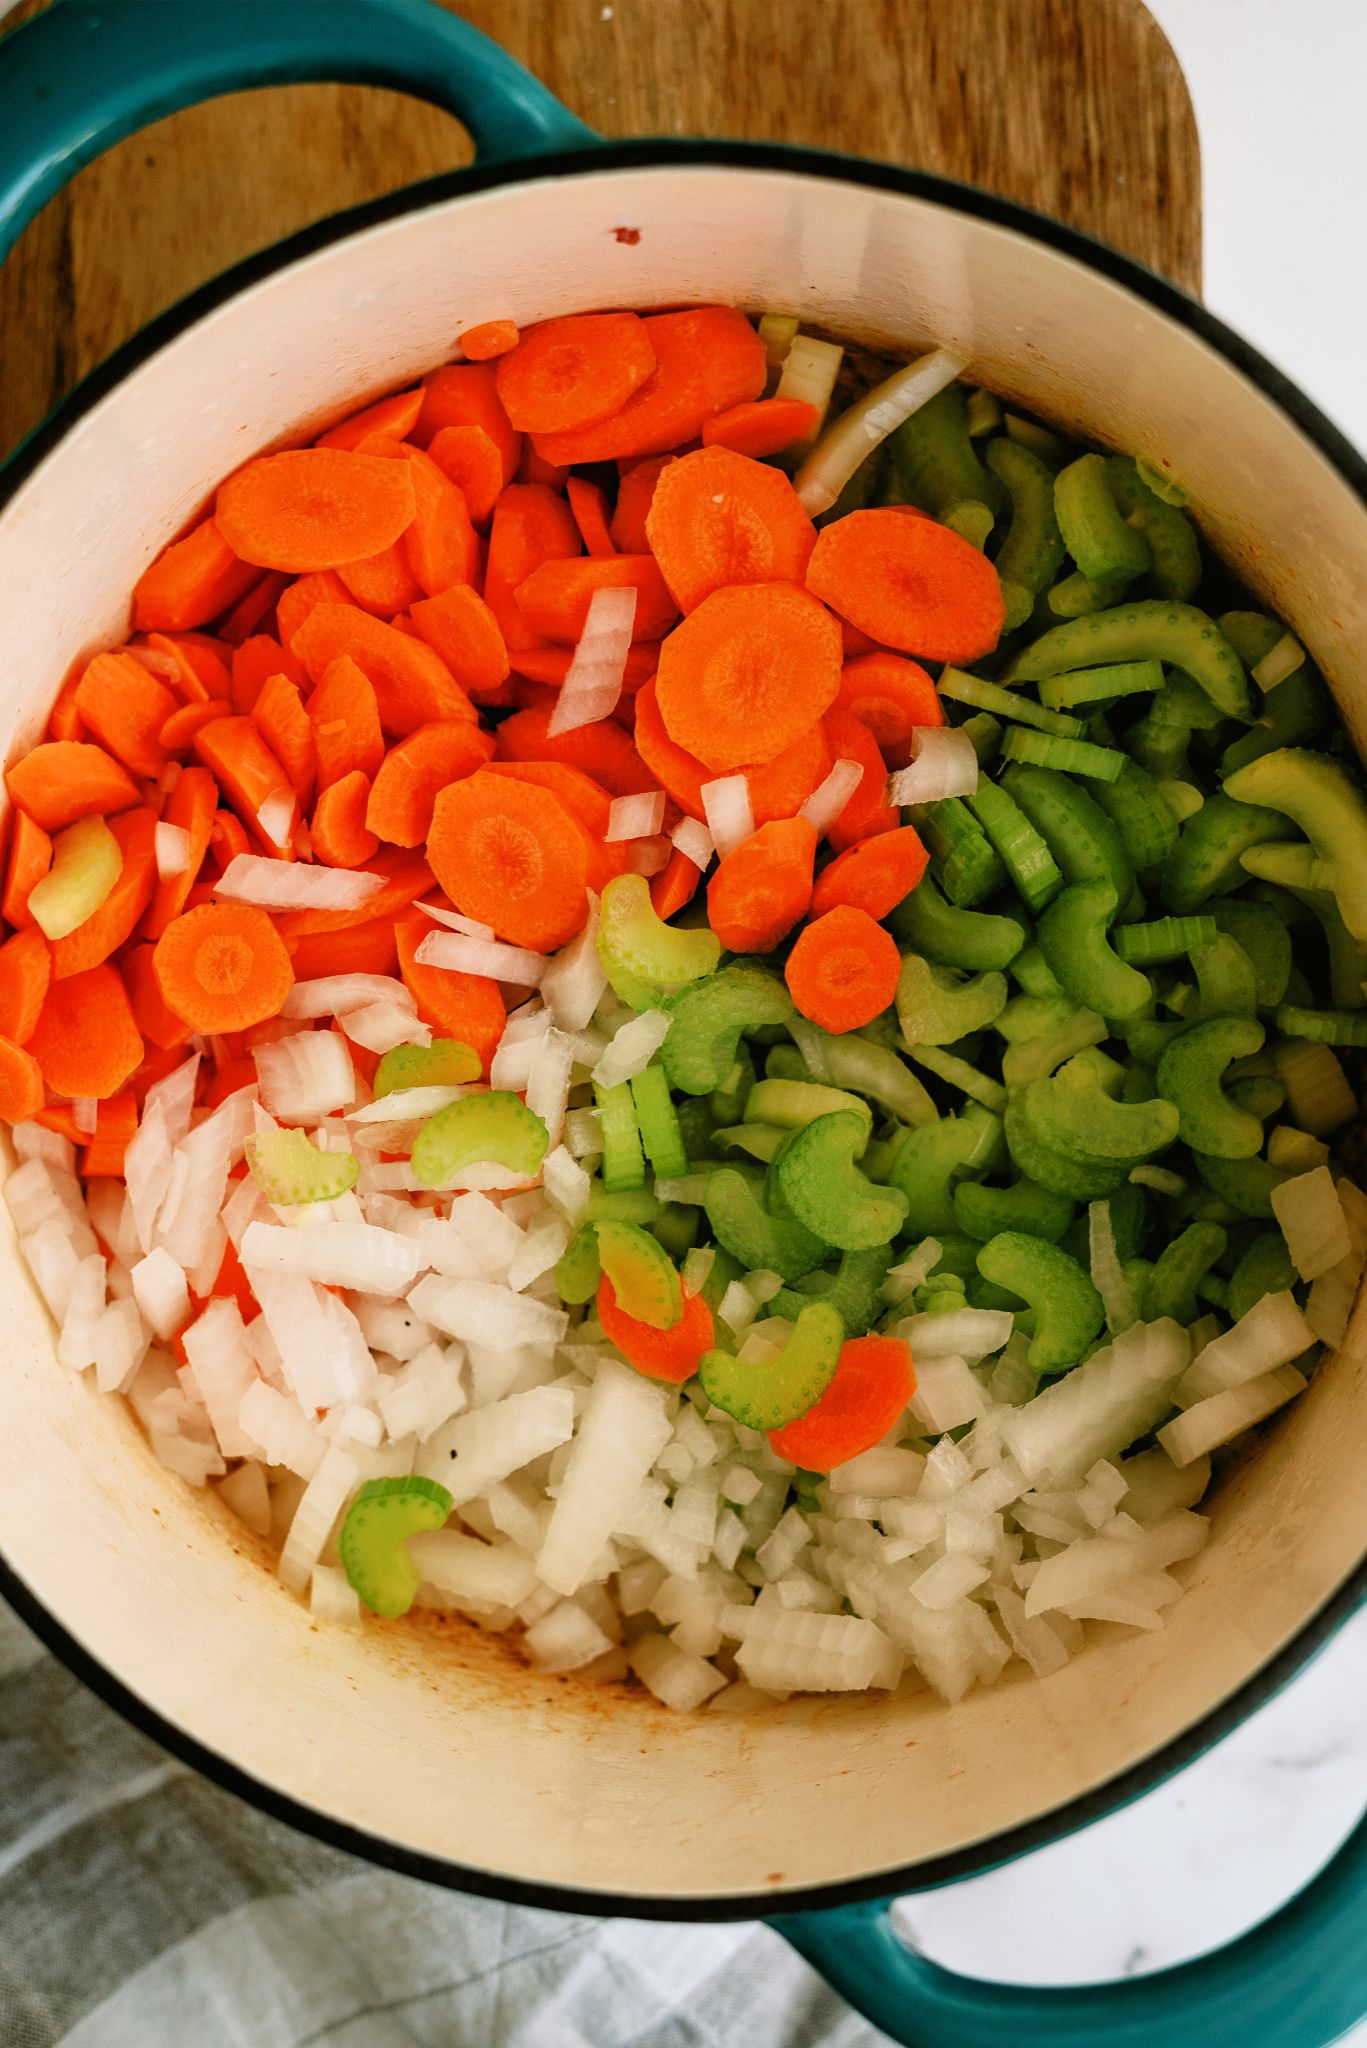 Chopped vegetables in stock pot